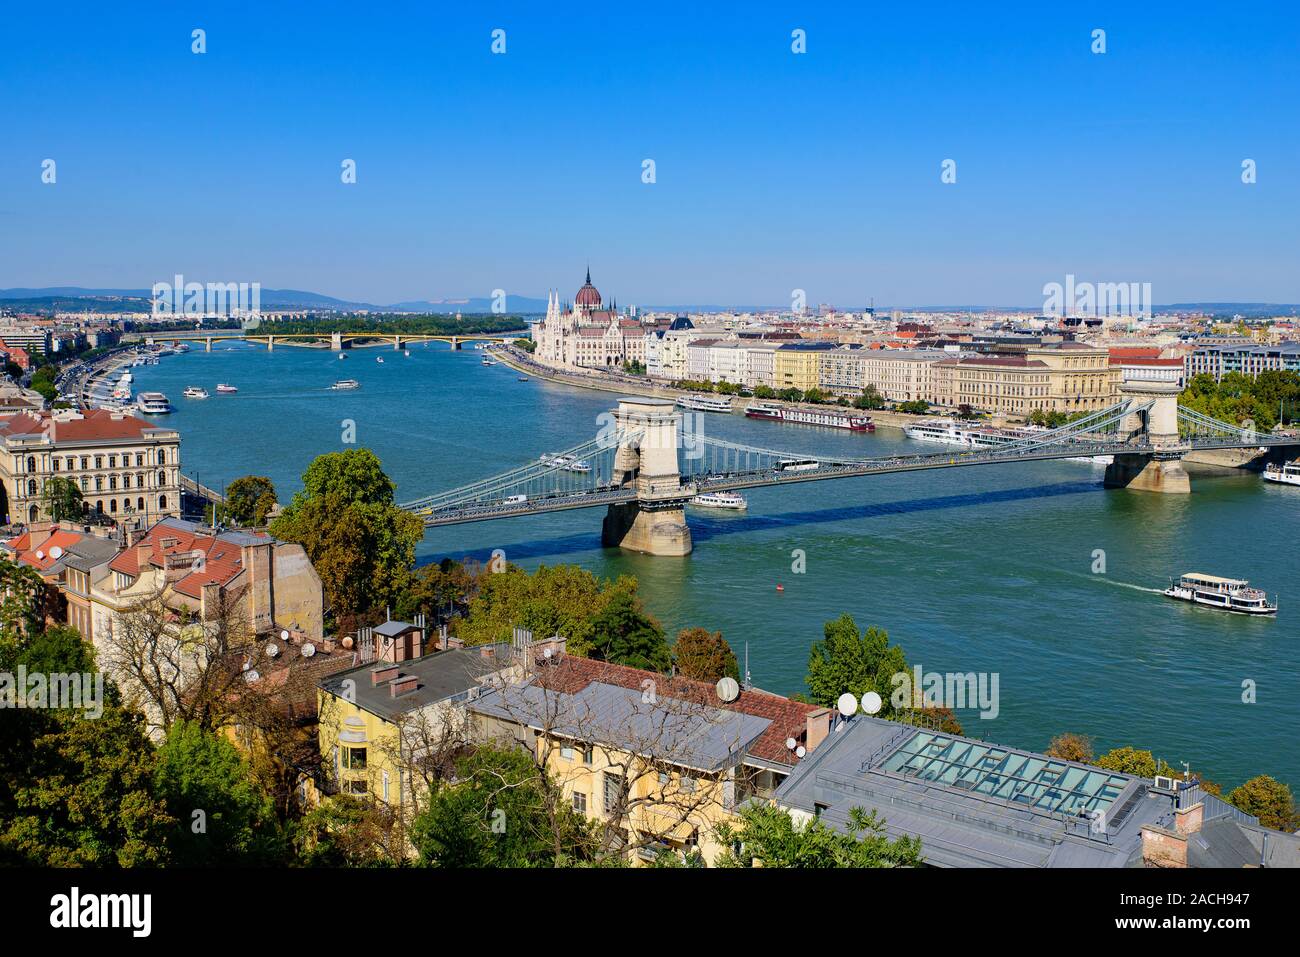 Panorama of Hungarian Parliament Building, Széchenyi Chain Bridge, and River Danube in Budapest, Hungary Stock Photo